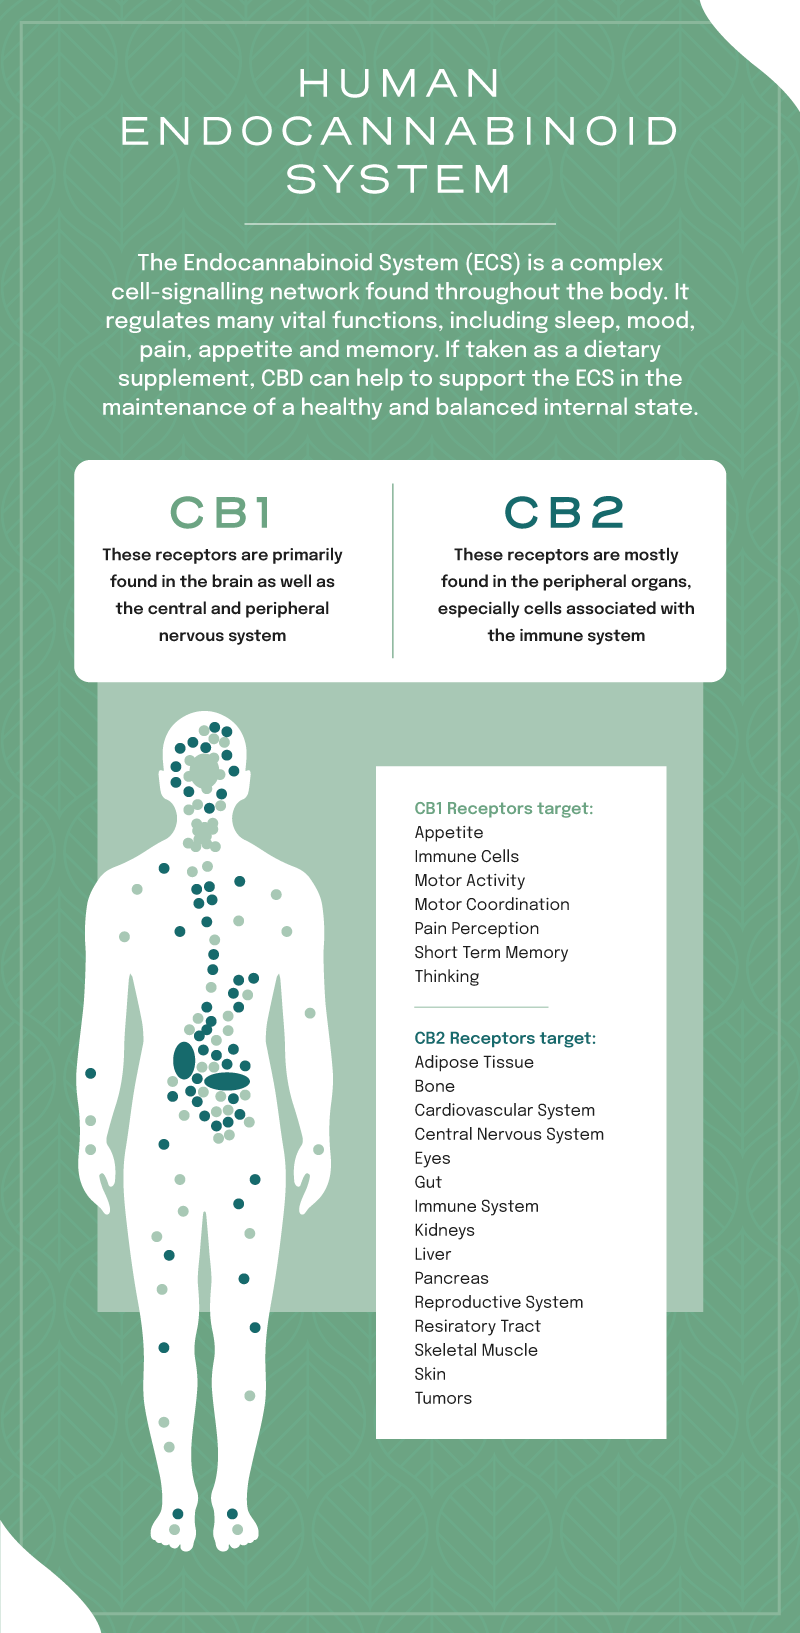 what is the endocannabinoid system?